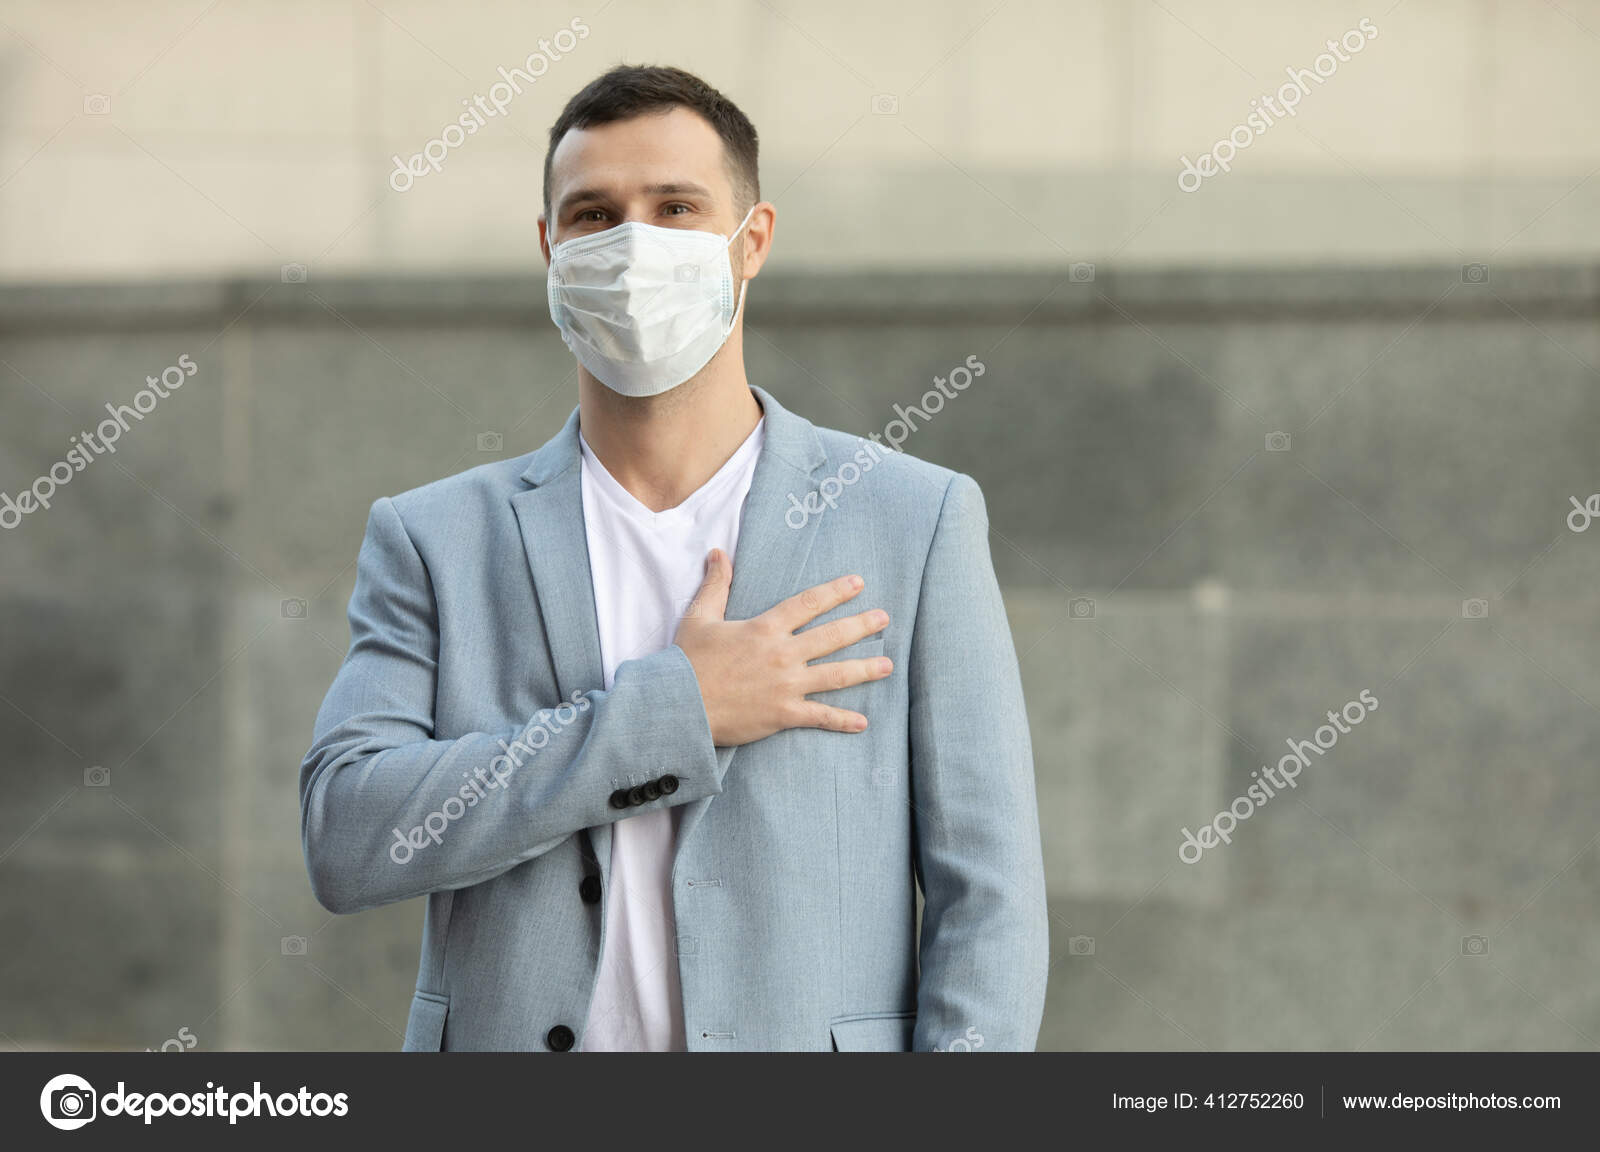 Man Wearing Surgical Mask Greets His Hand Heart New Greeting Stock